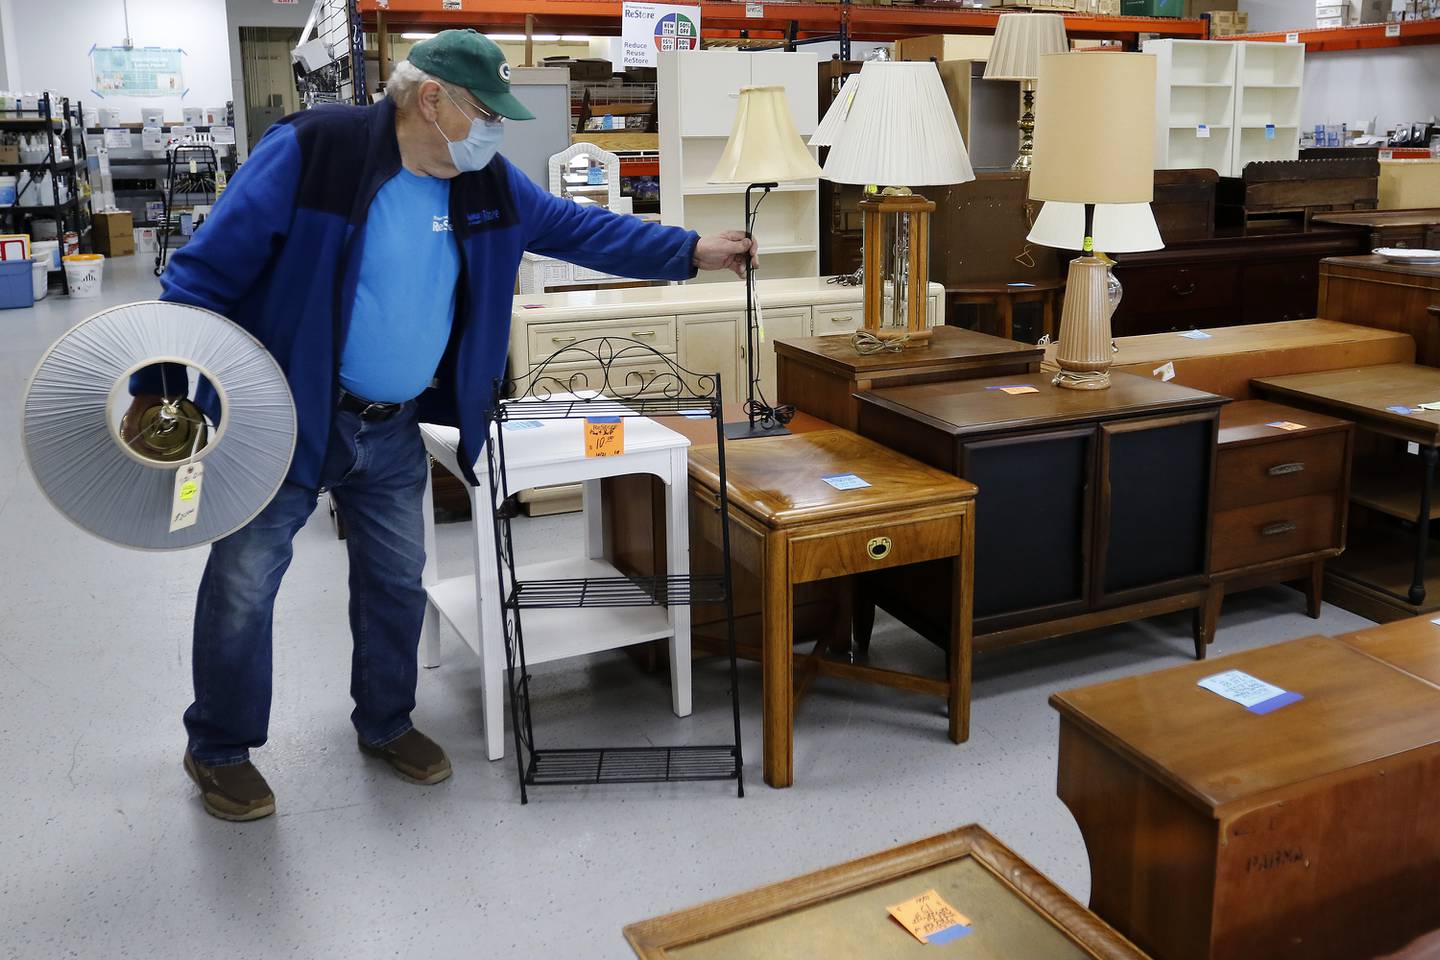 Warren Wascher puts lamps out for sale after testing them for functionality Thursday, Nov. 18, 2021, at the Habitat for Humanity ReStore location in Woodstock.  A backlog of supplies at many retail furniture and home decor stores has contributed to an increase in shoppers purchasing their home furnishings from antique, thrift, and secondhand stores.